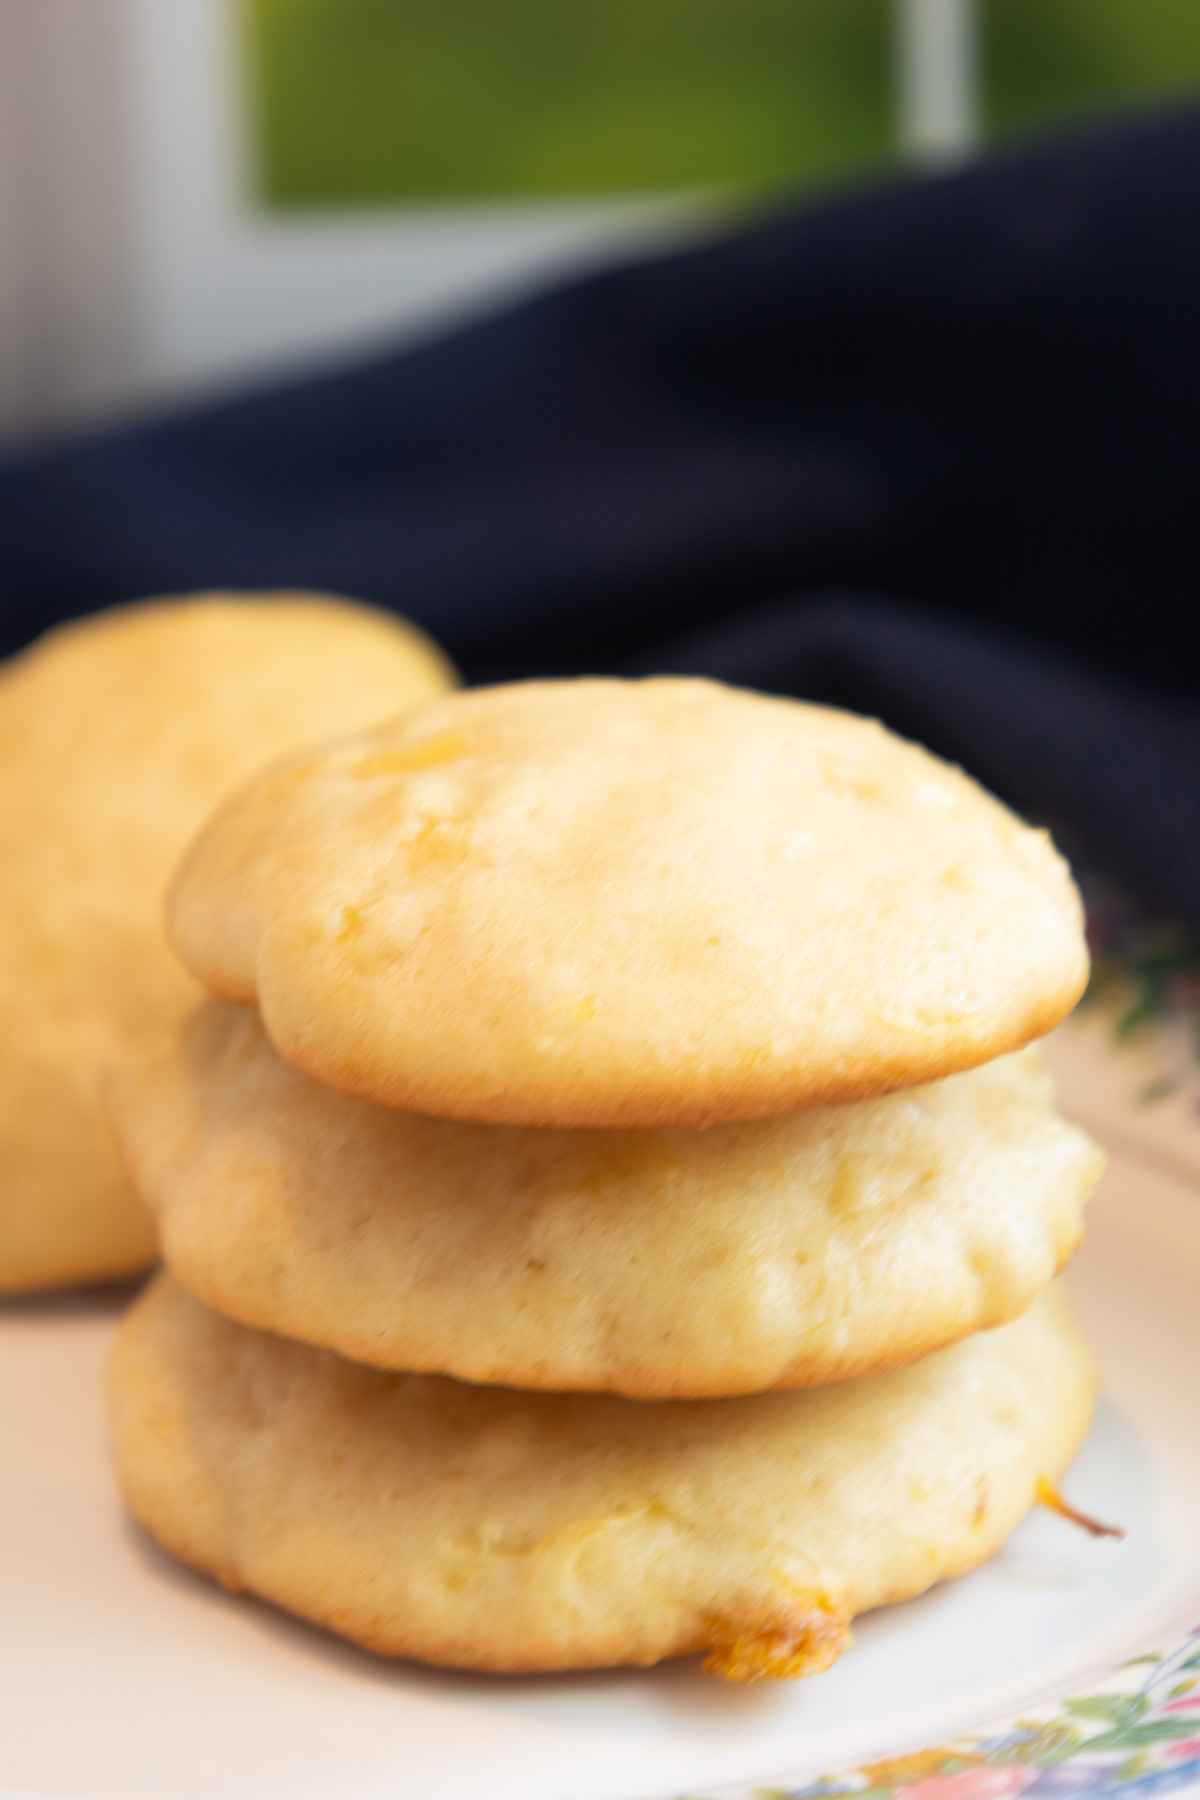 Upclose image of a stack of 3 pineapple cookies.